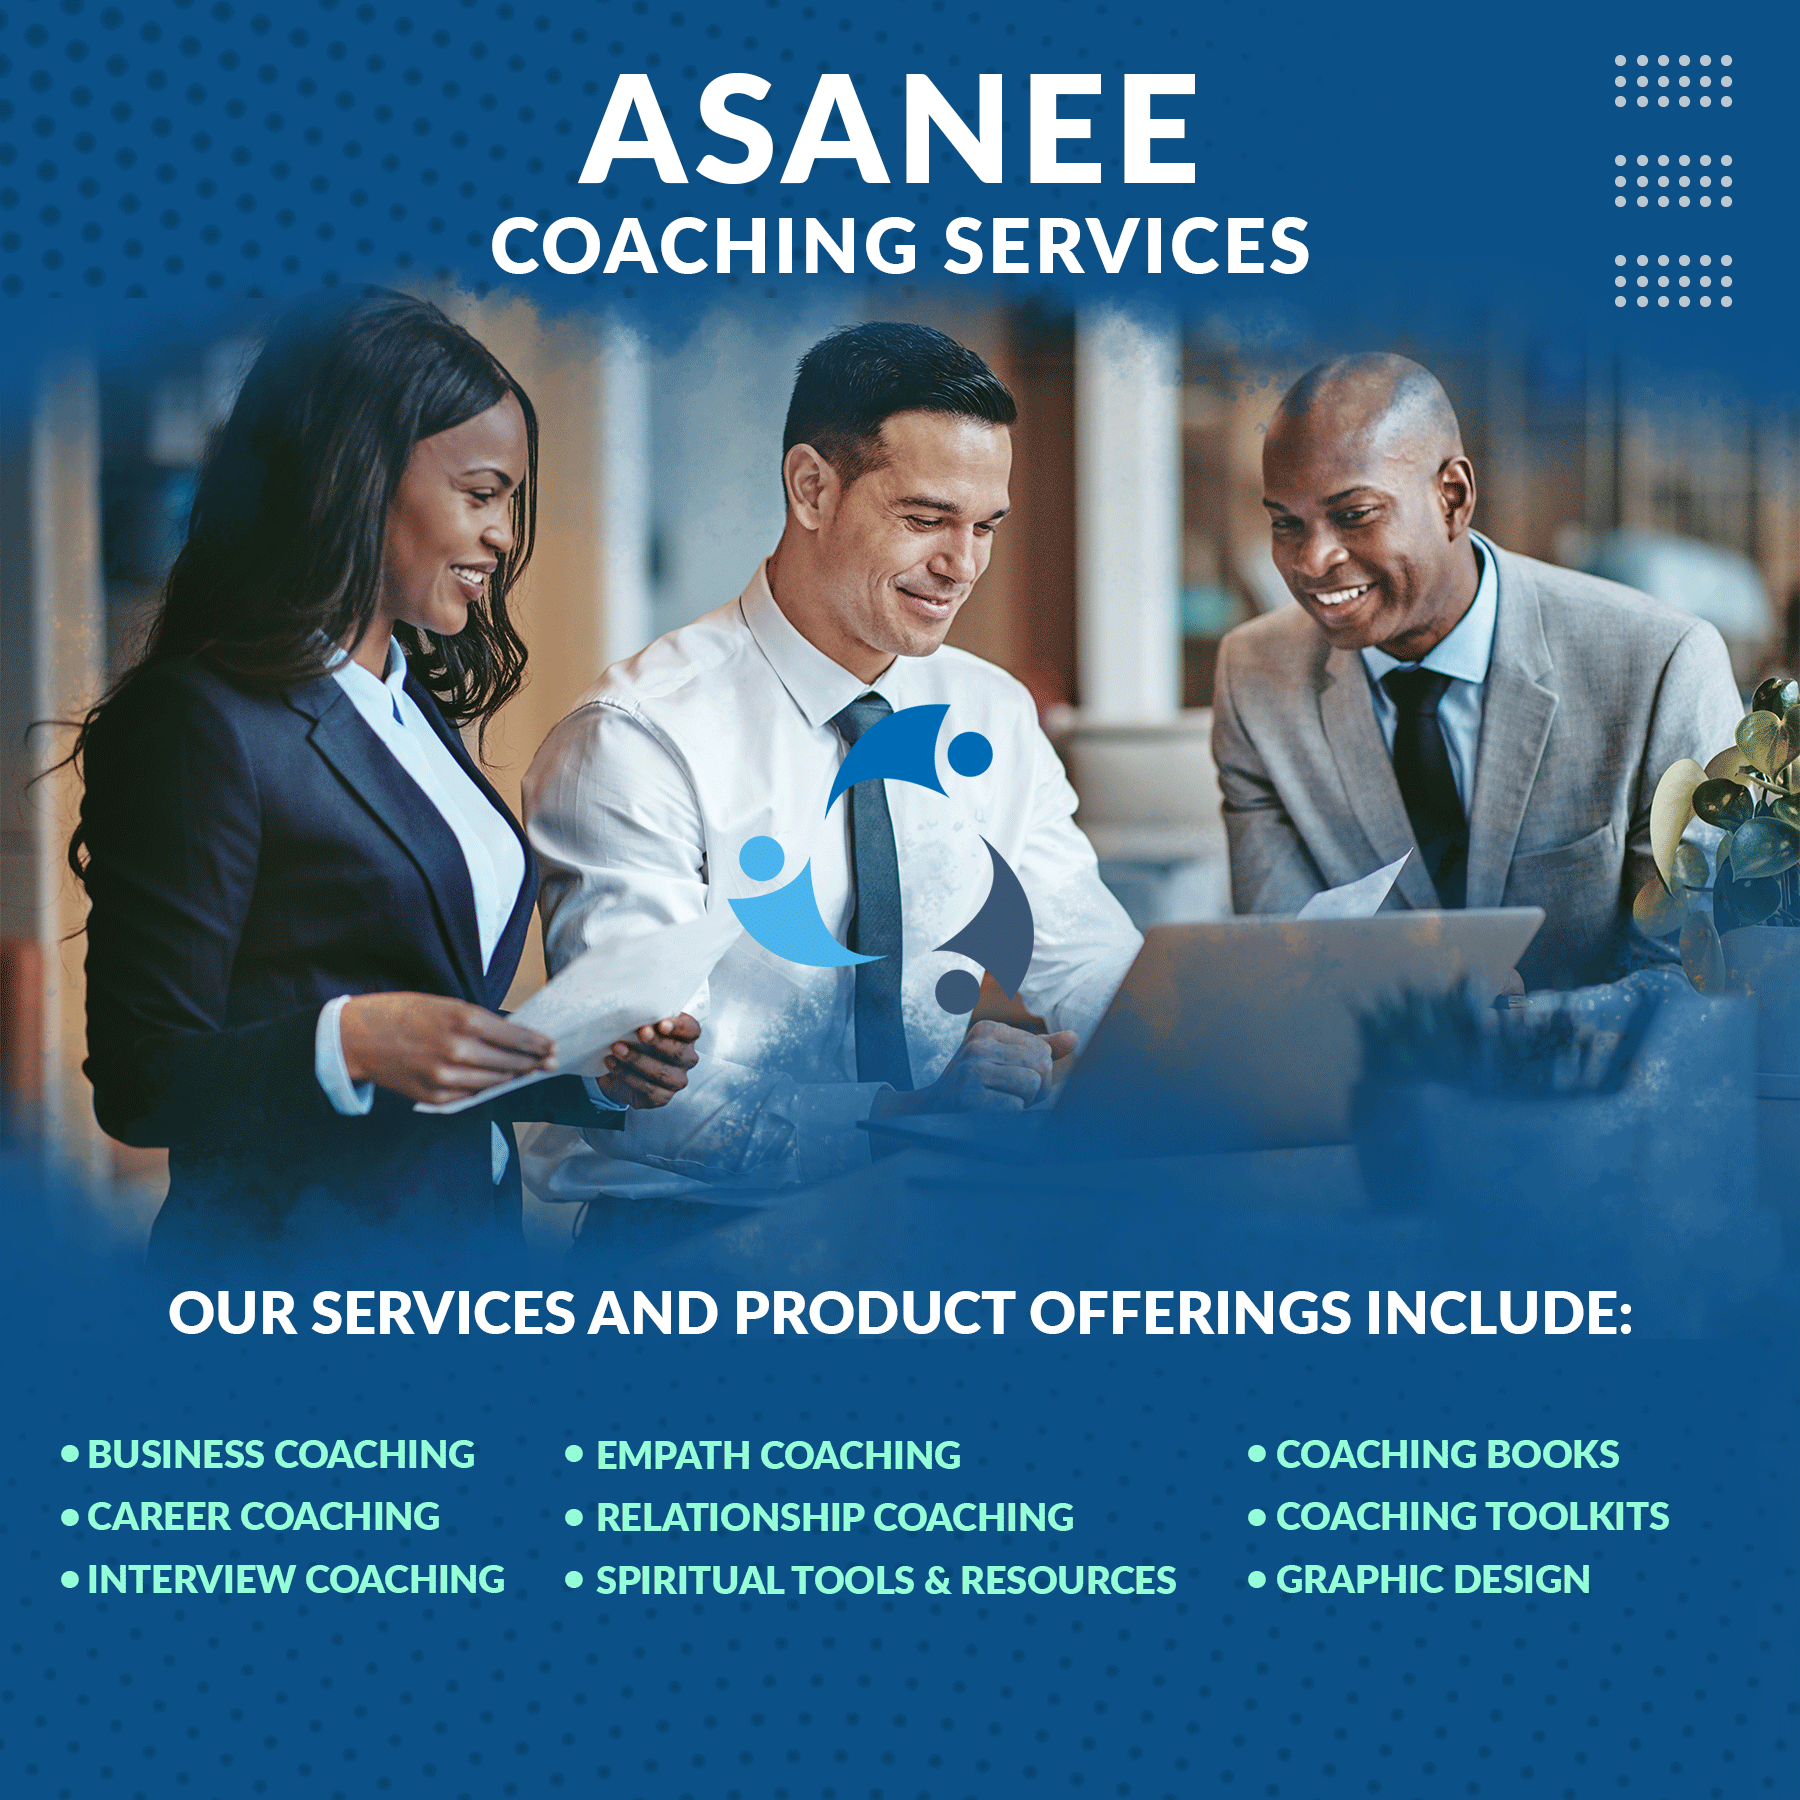 Asanee Coaching Services